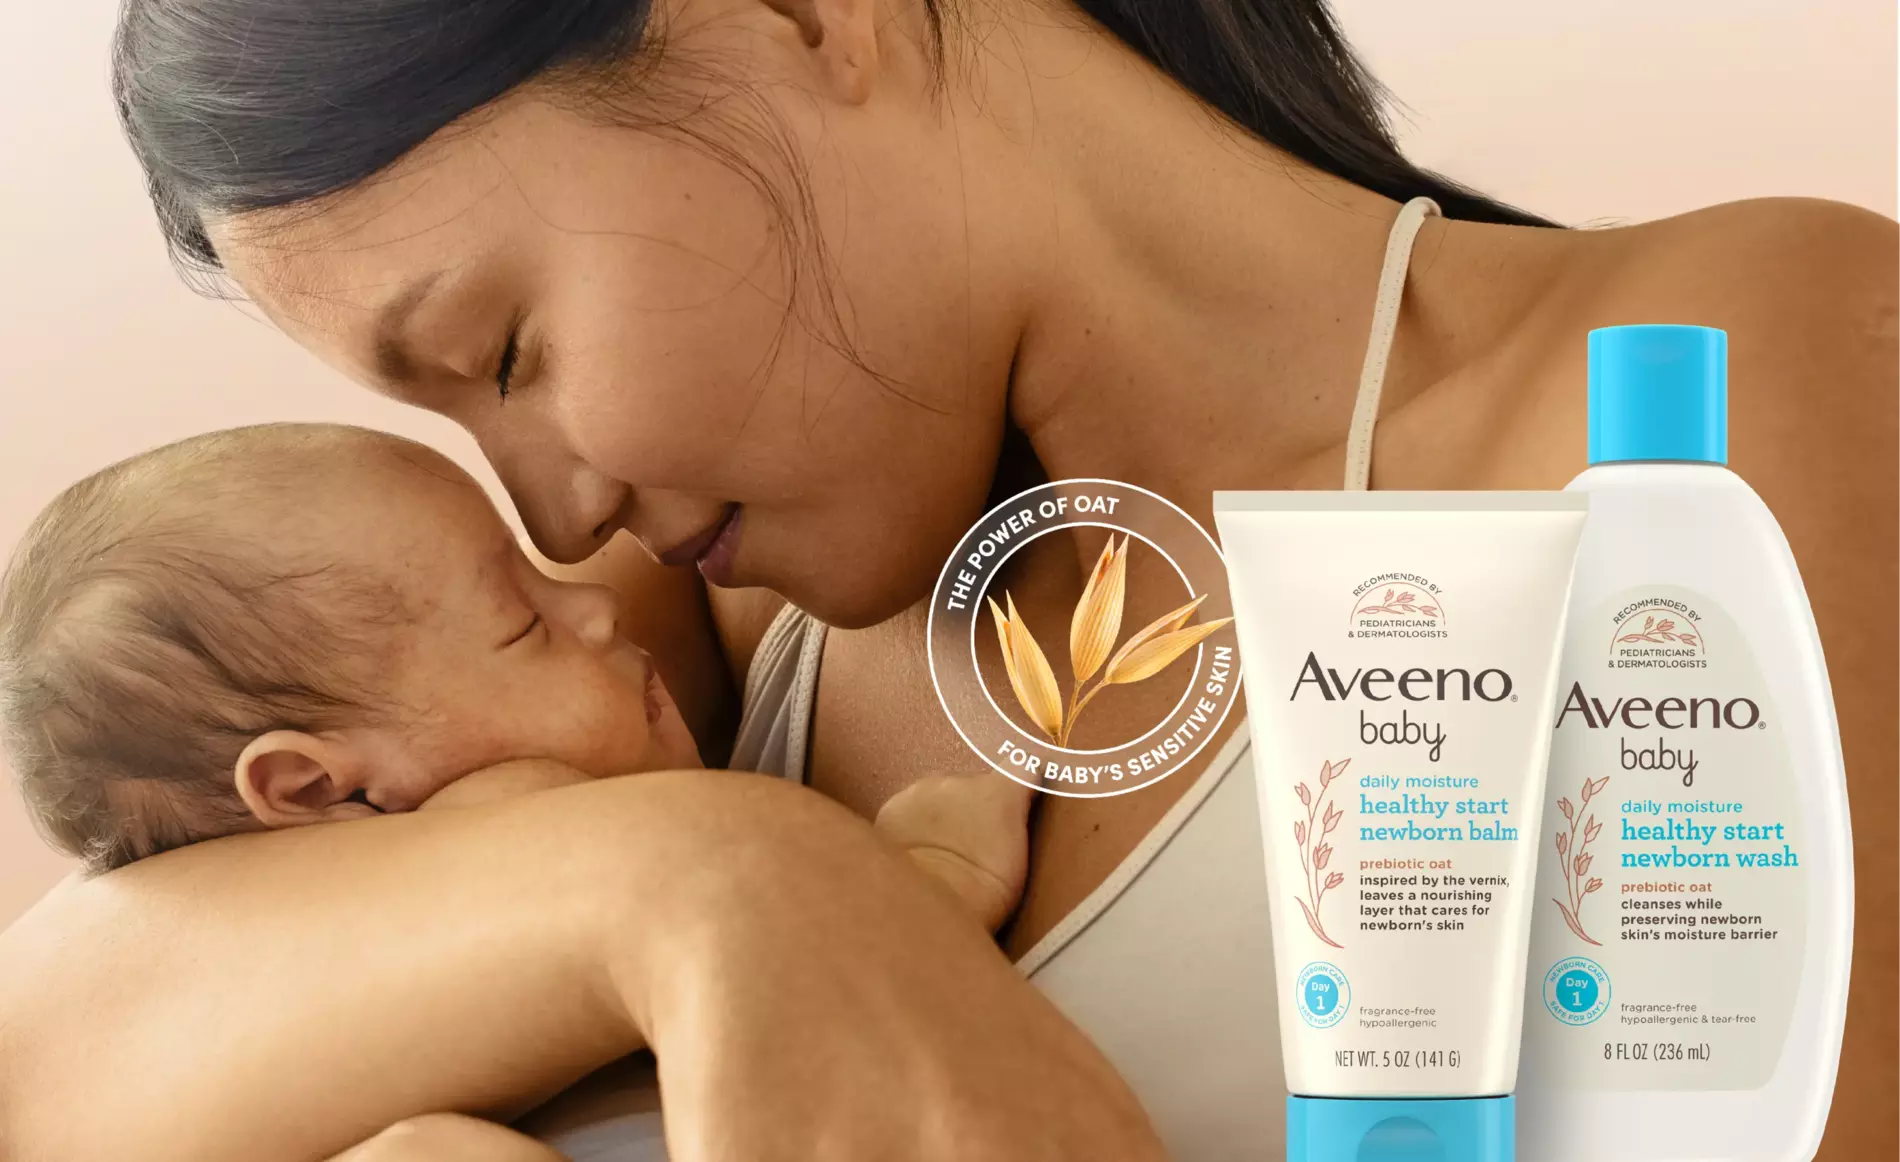 Aveeno_Baby_Overview_Mother_Holding _Baby